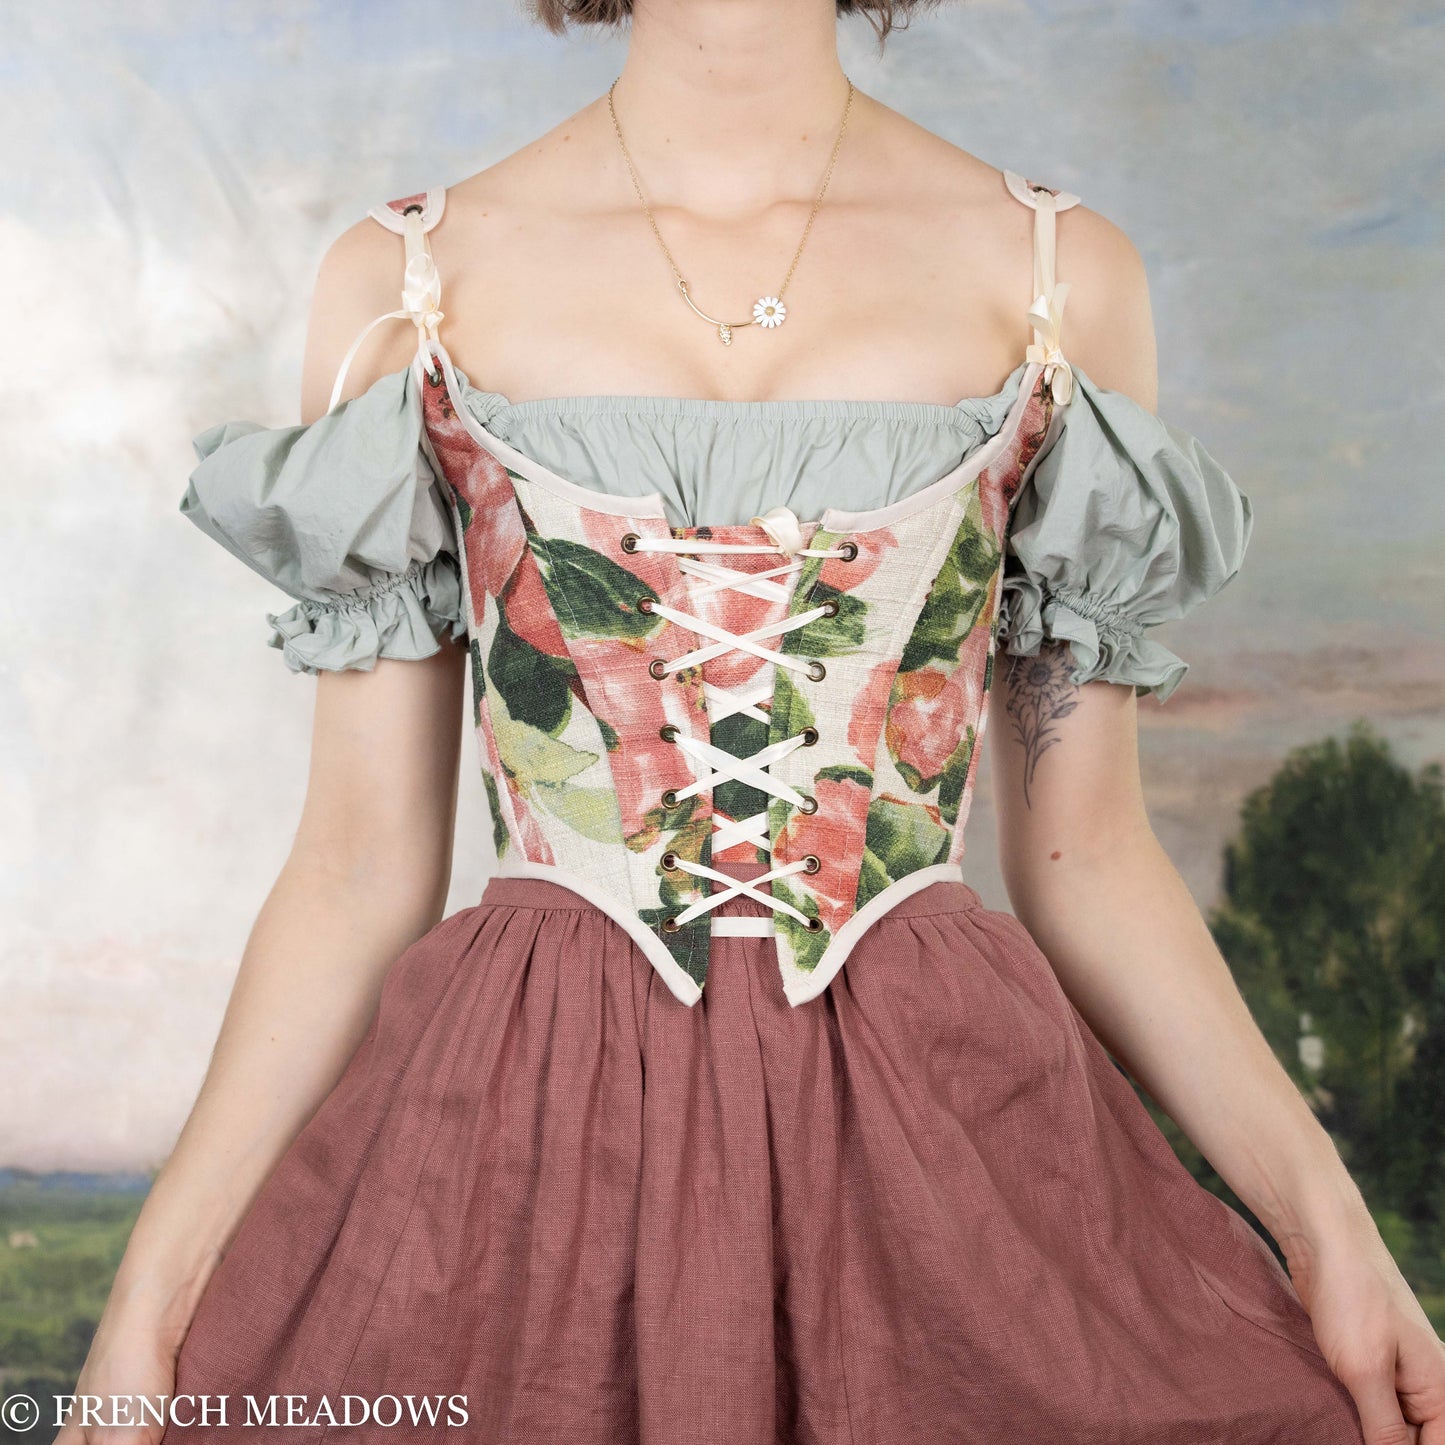 mode wearing pink floral corset top with pink peonies and green leaves